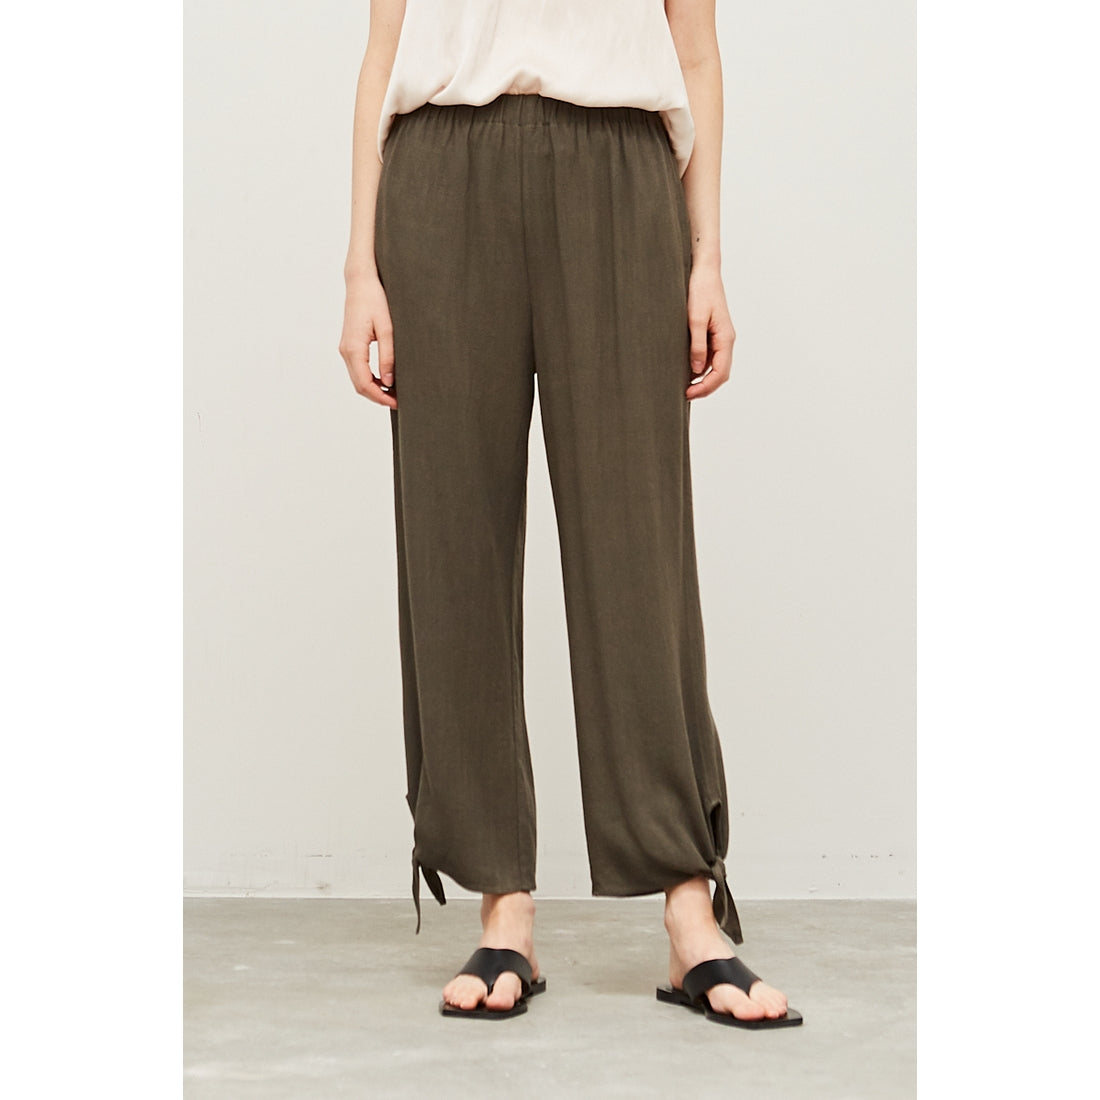 Grade & Gather Linen Tie Pant- Charcoal Green